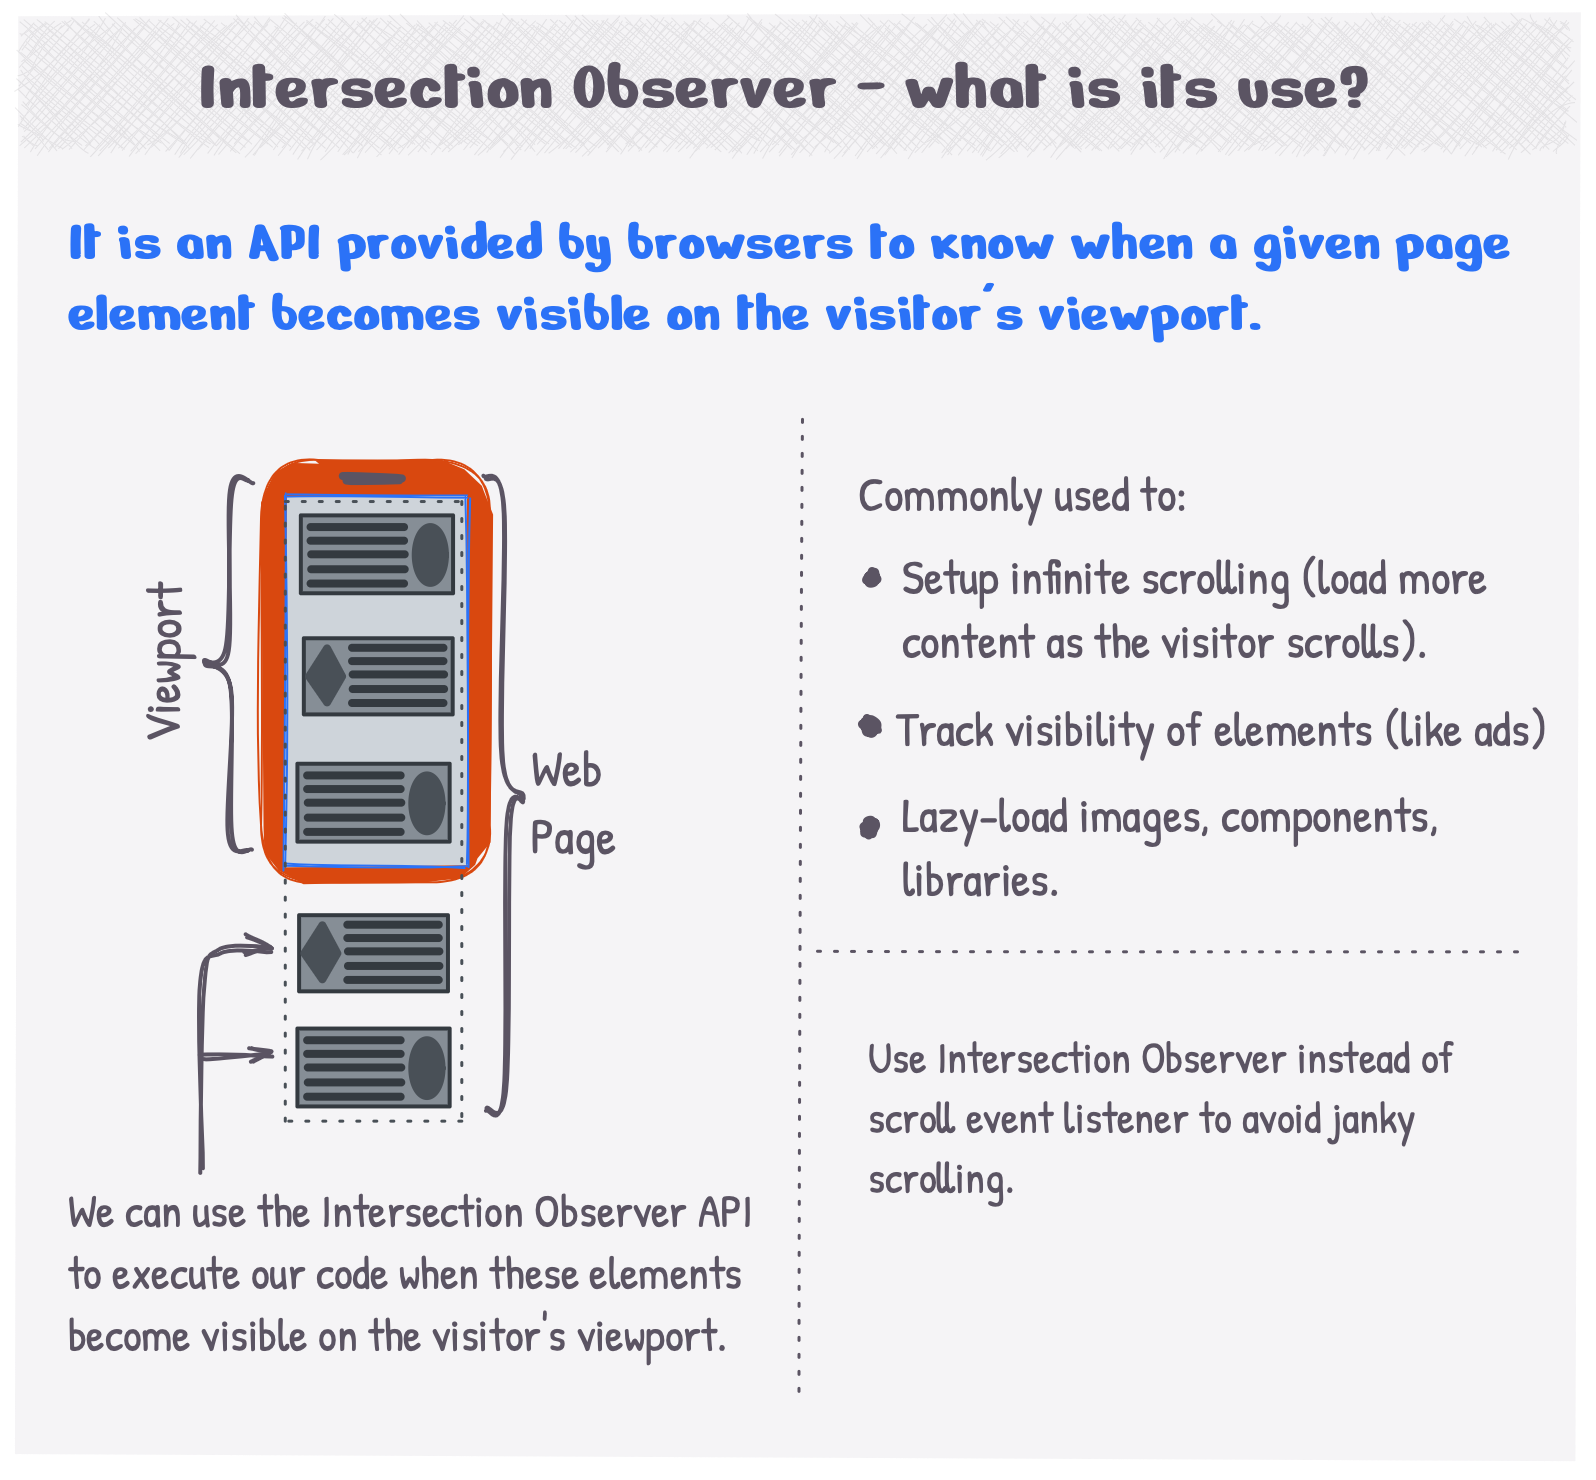 What is the use of Intersection Observer